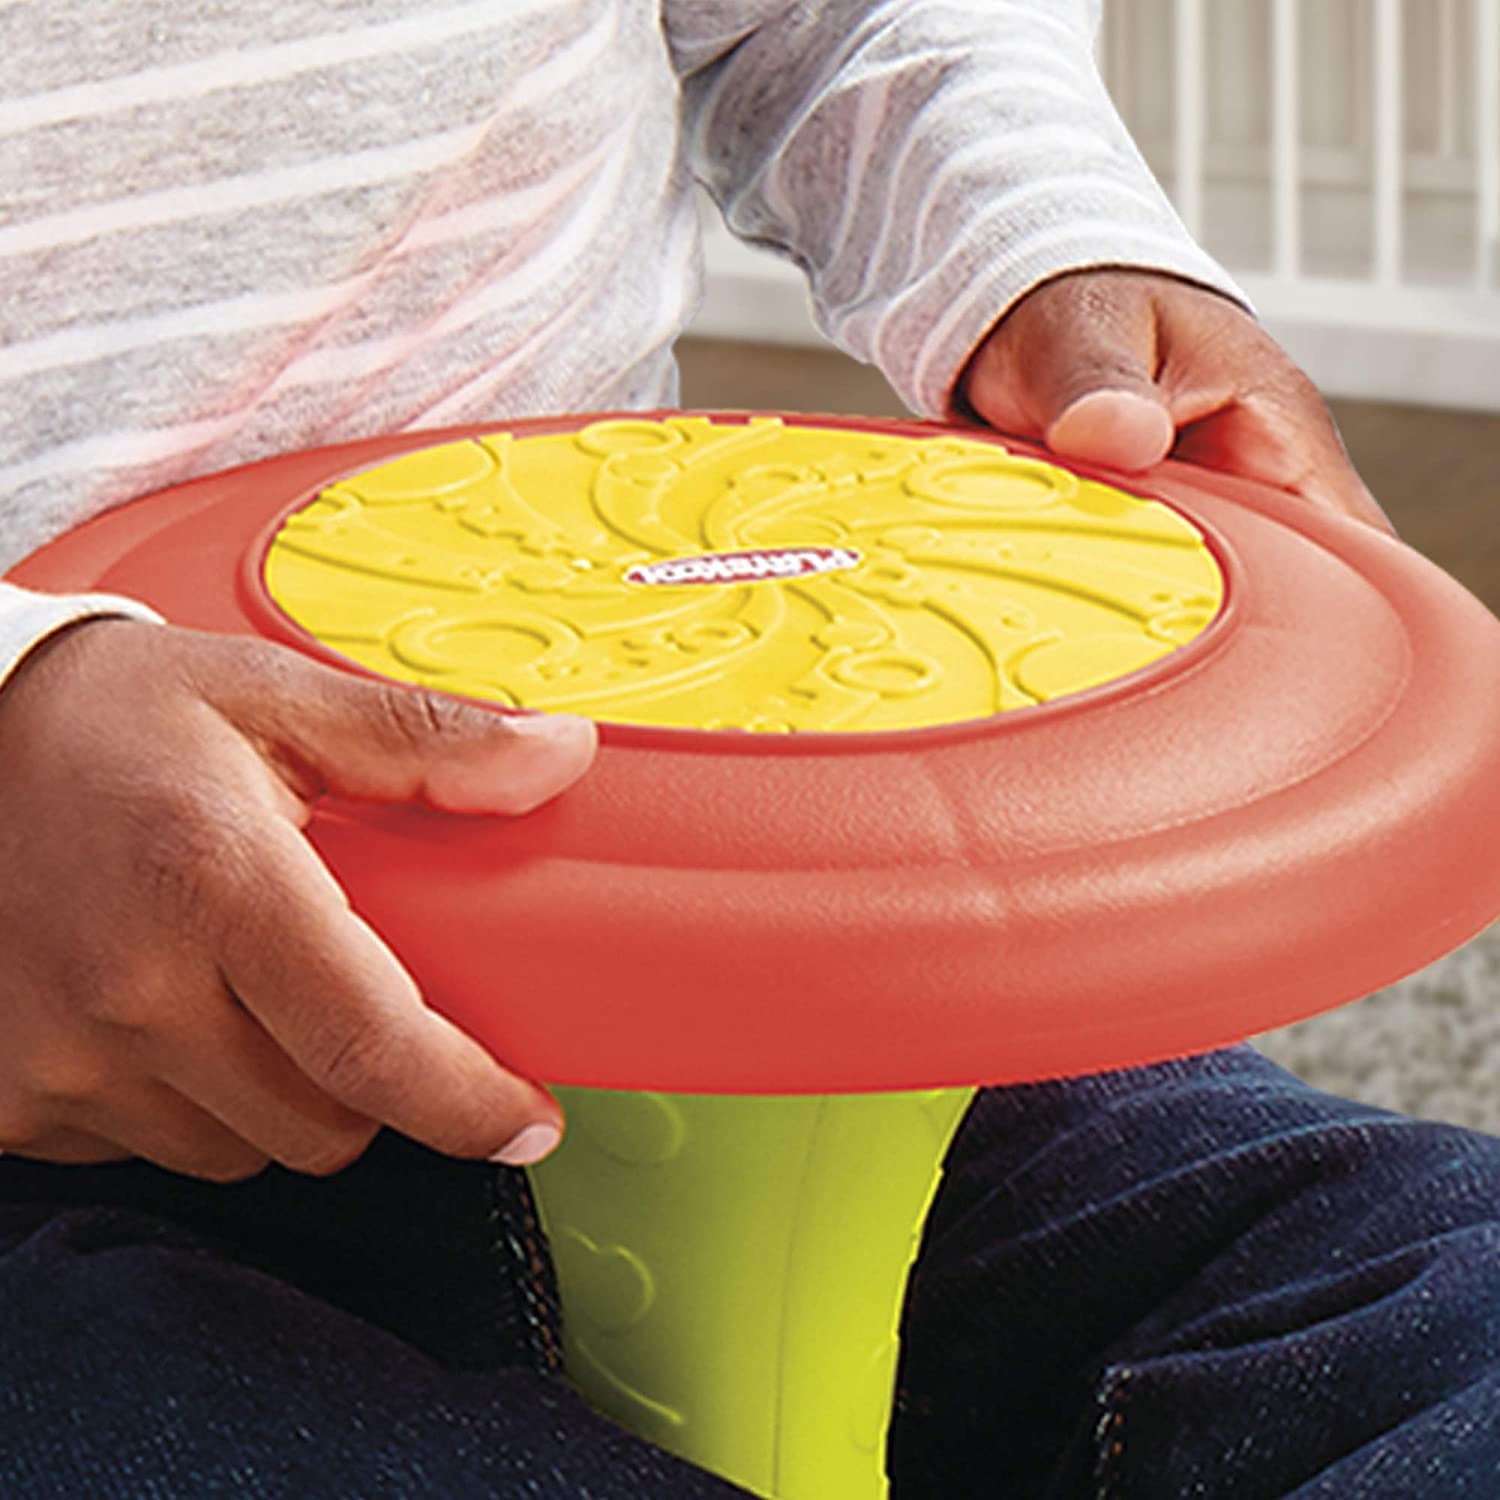 Playskool Sit ‘n Spin Classic Spinning Activity Toy for Toddlers 34451AF0 for sale online 